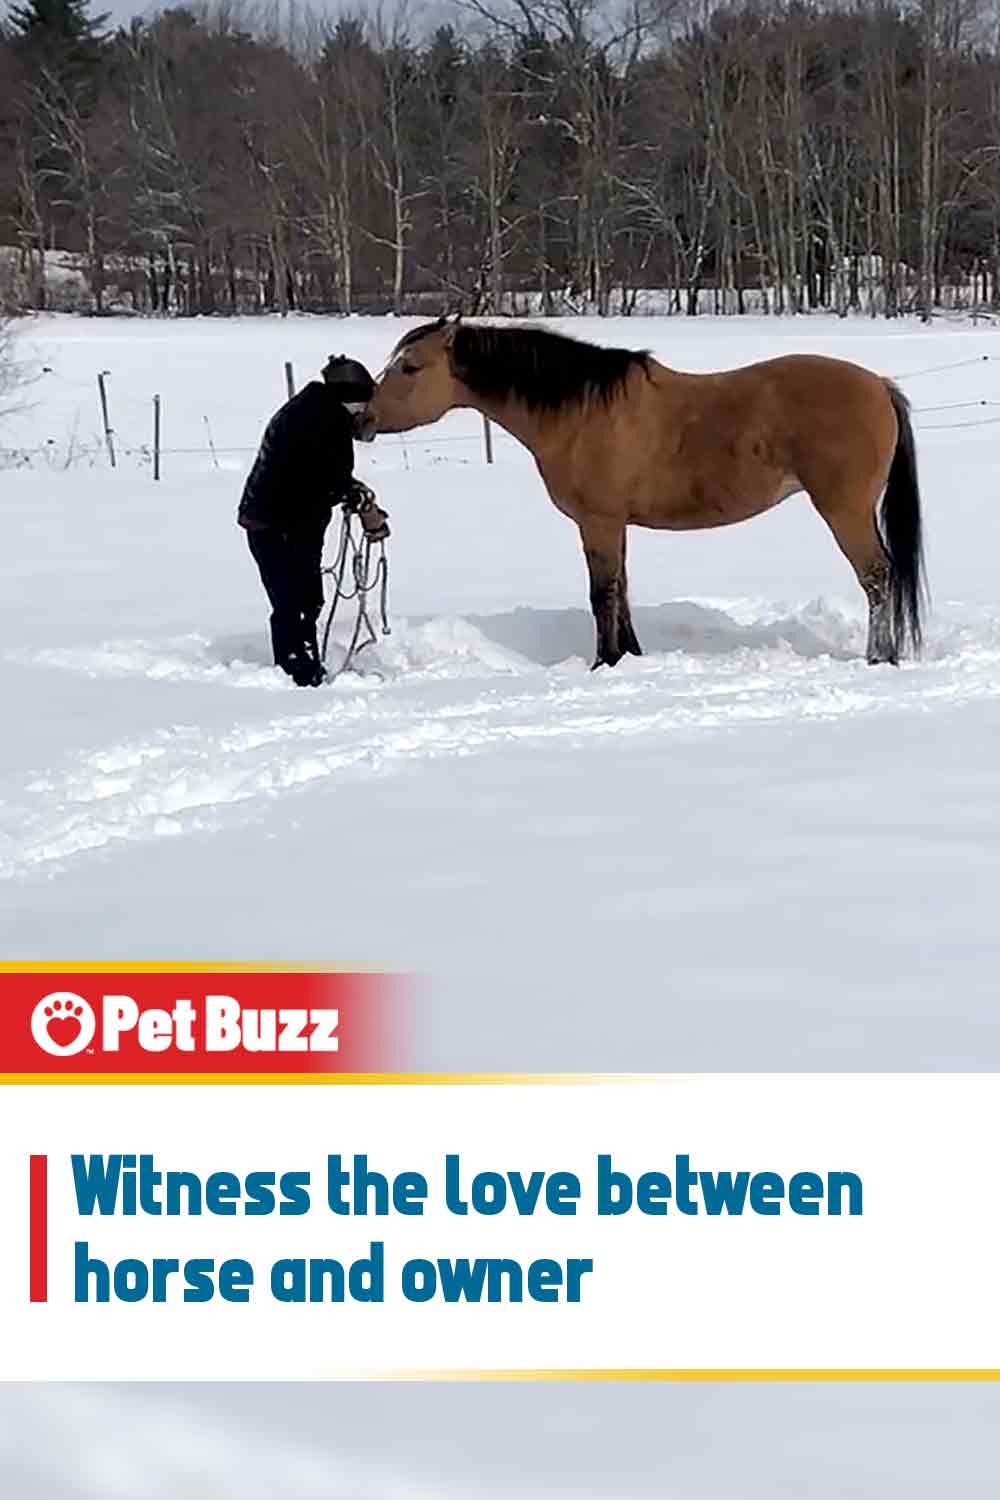 Witness the love between horse and owner